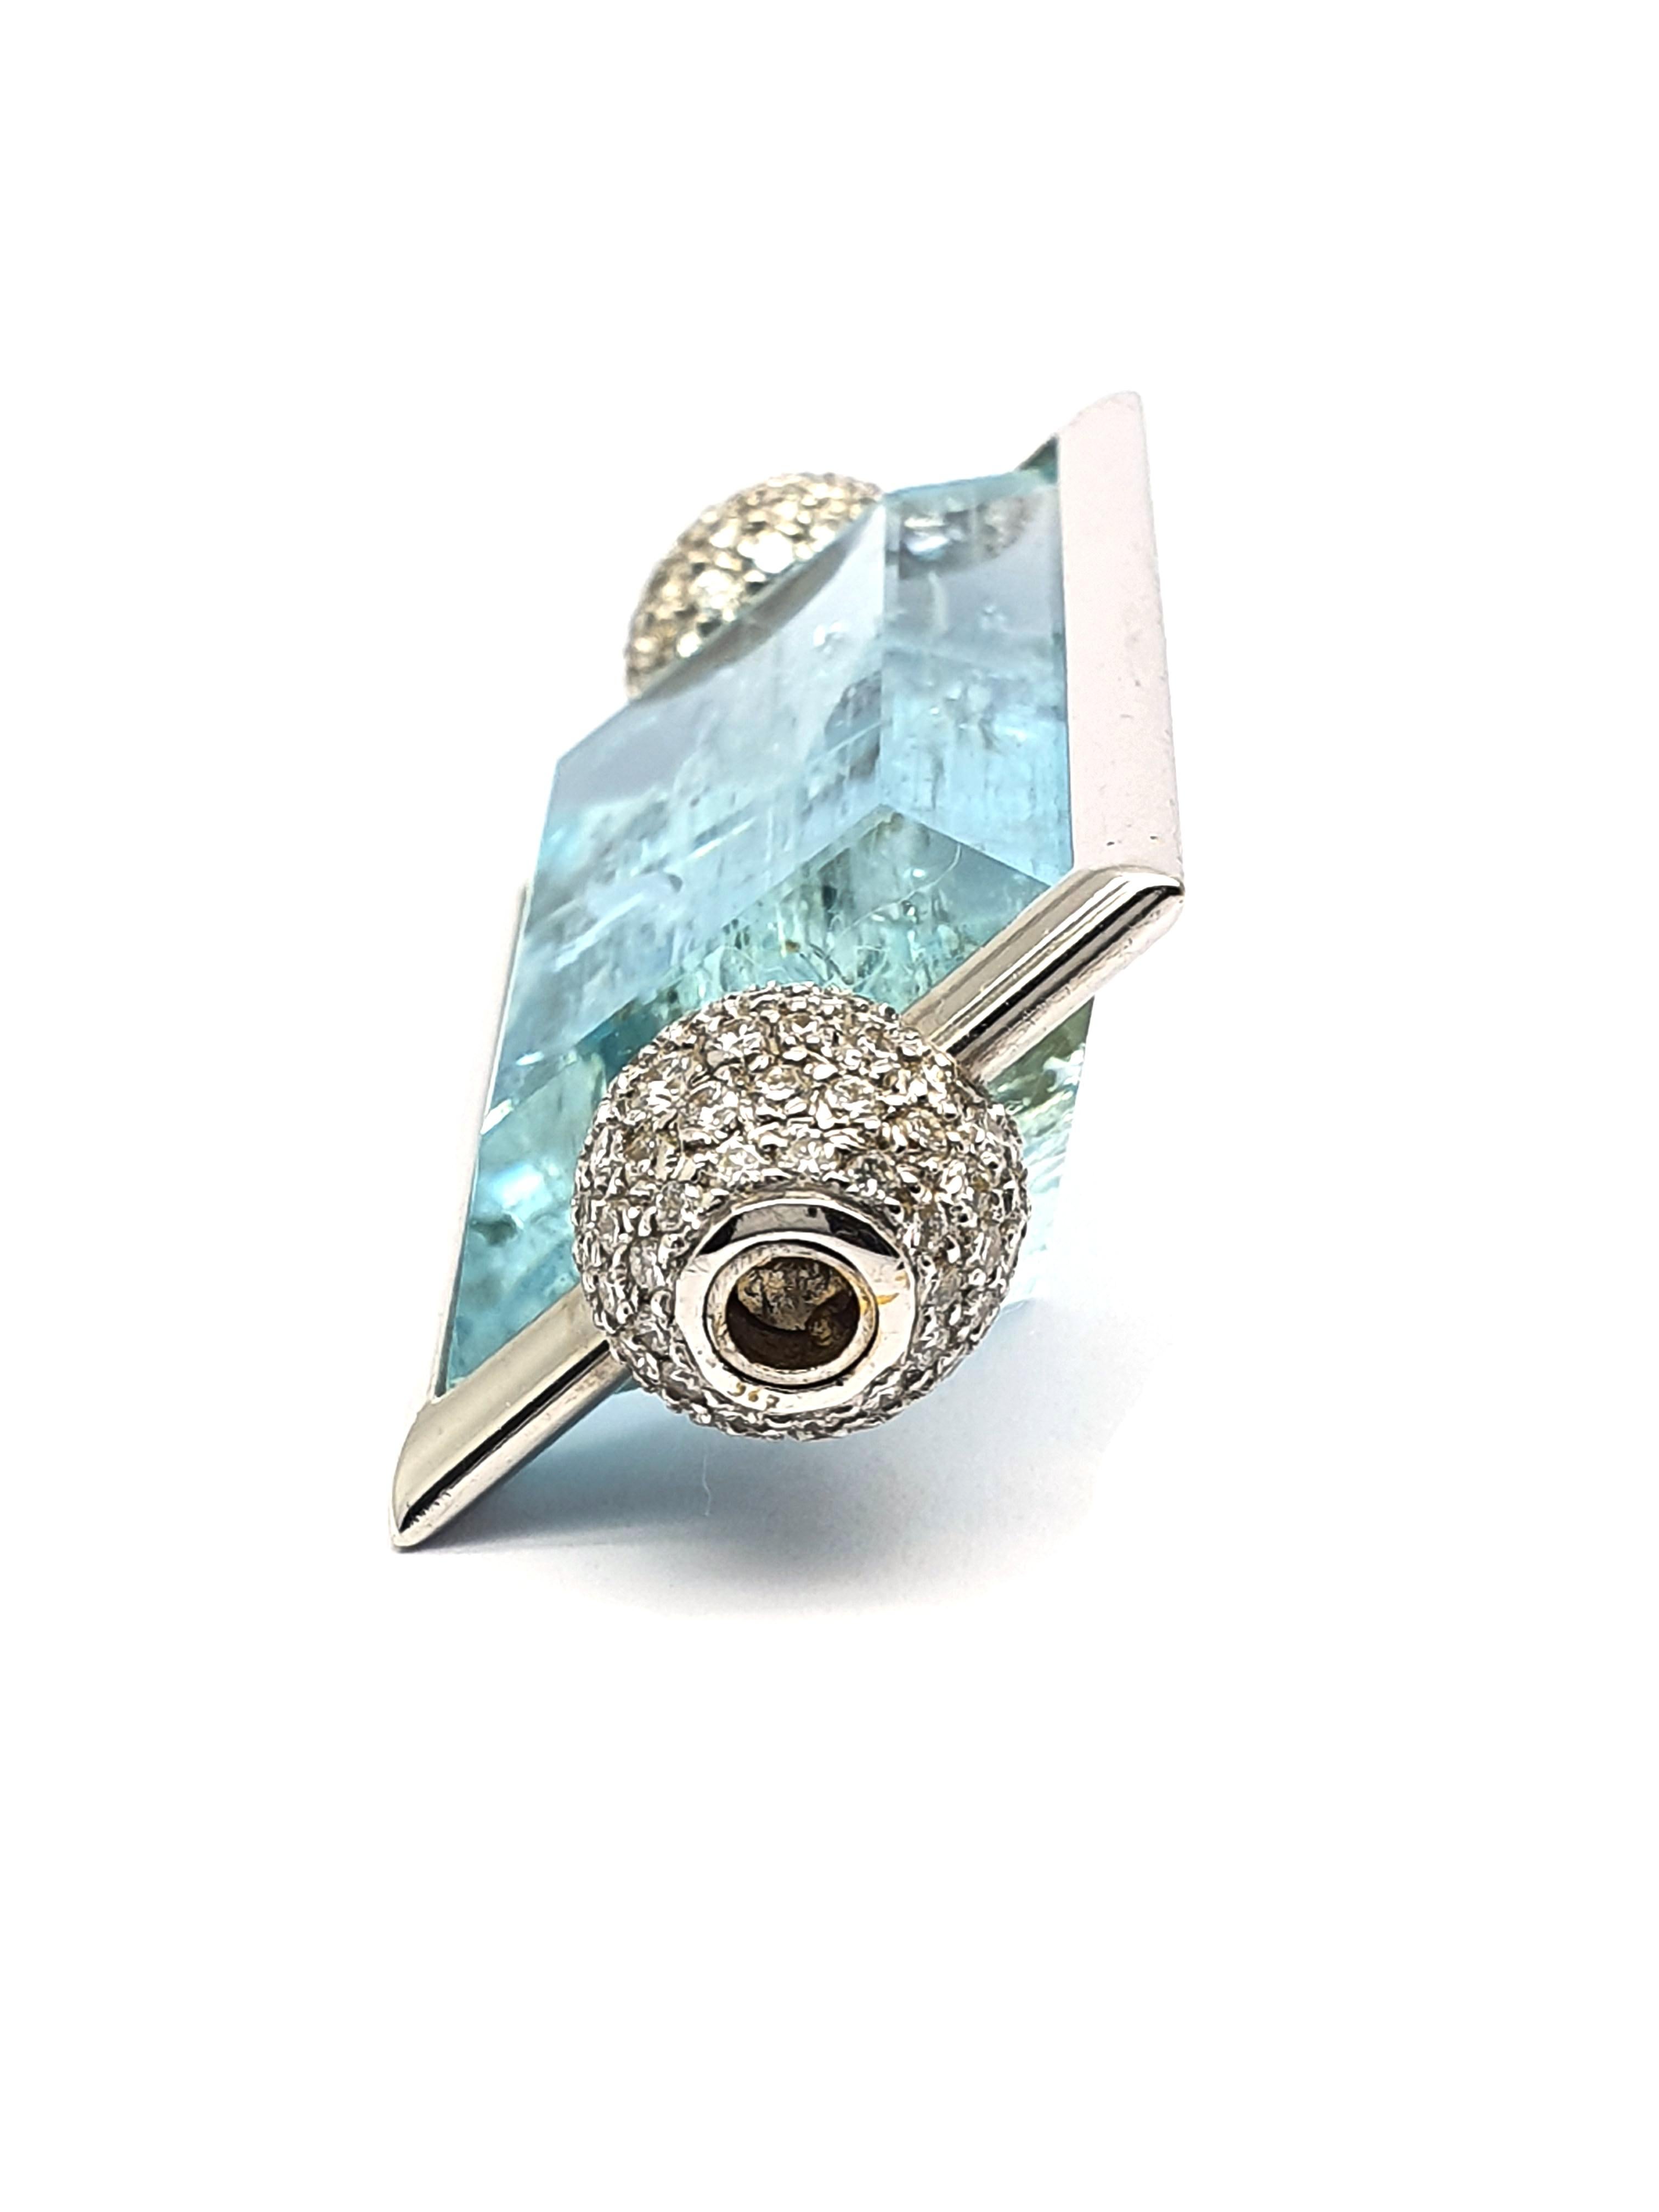 Marking the beauty of the natural character of the aquamarine by showing and pronouncing it is showing her love of the natural beauty of thing ans humans. This she always also shows the women with whom she design truly personal jewelry. Puck always